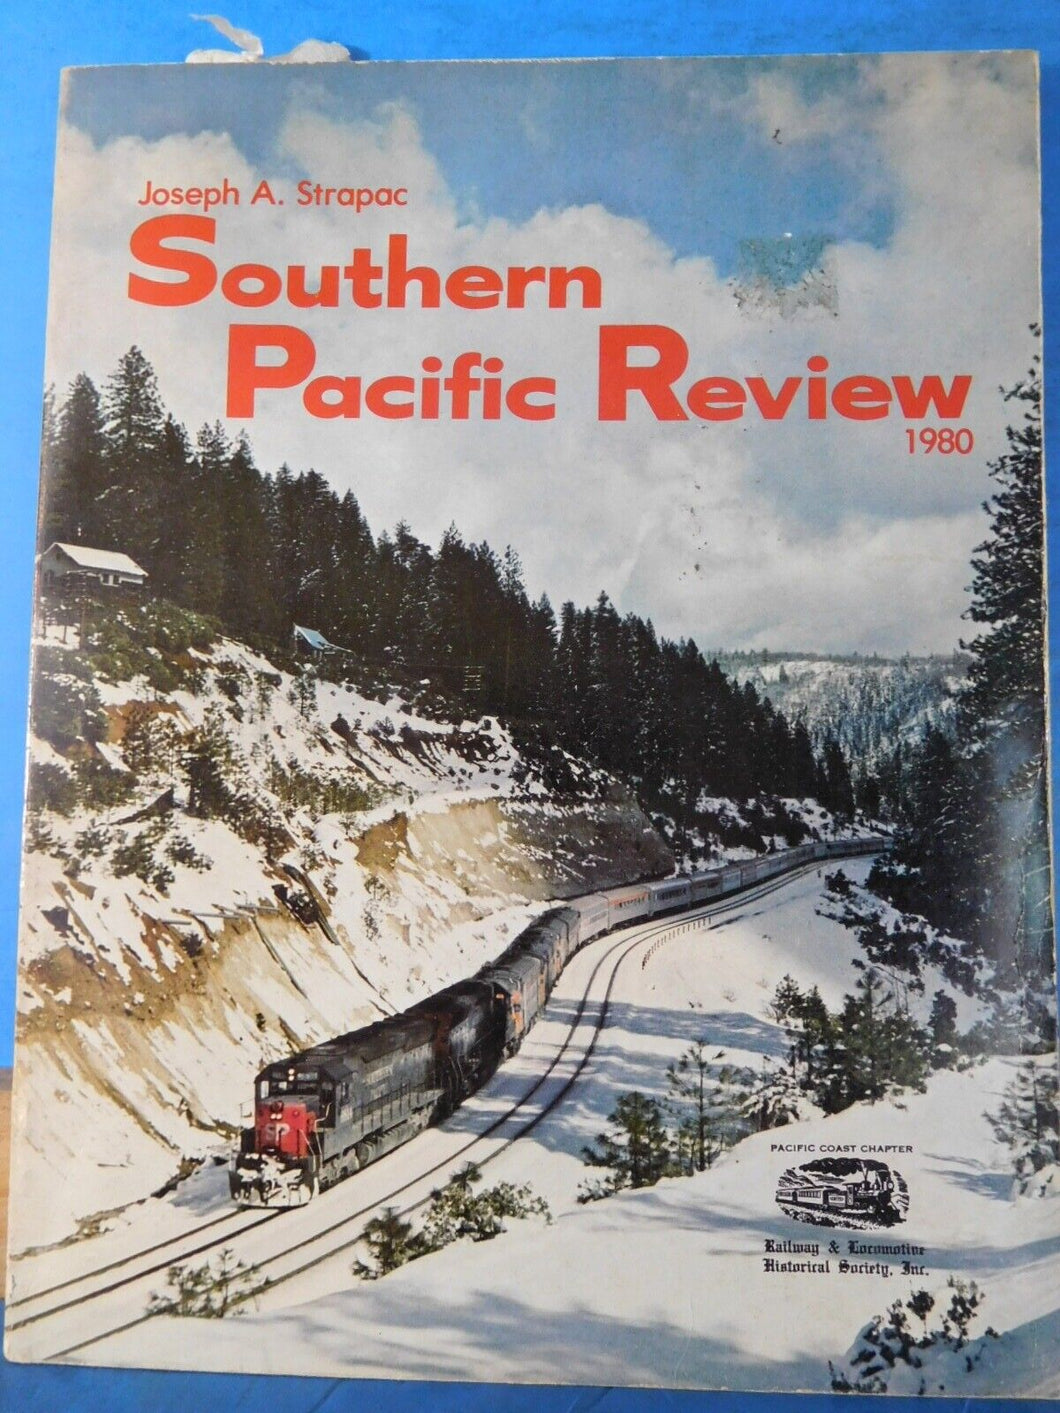 Southern Pacific Review 1980 By Joseph Strapac Soft Cover 1981  128 Pages